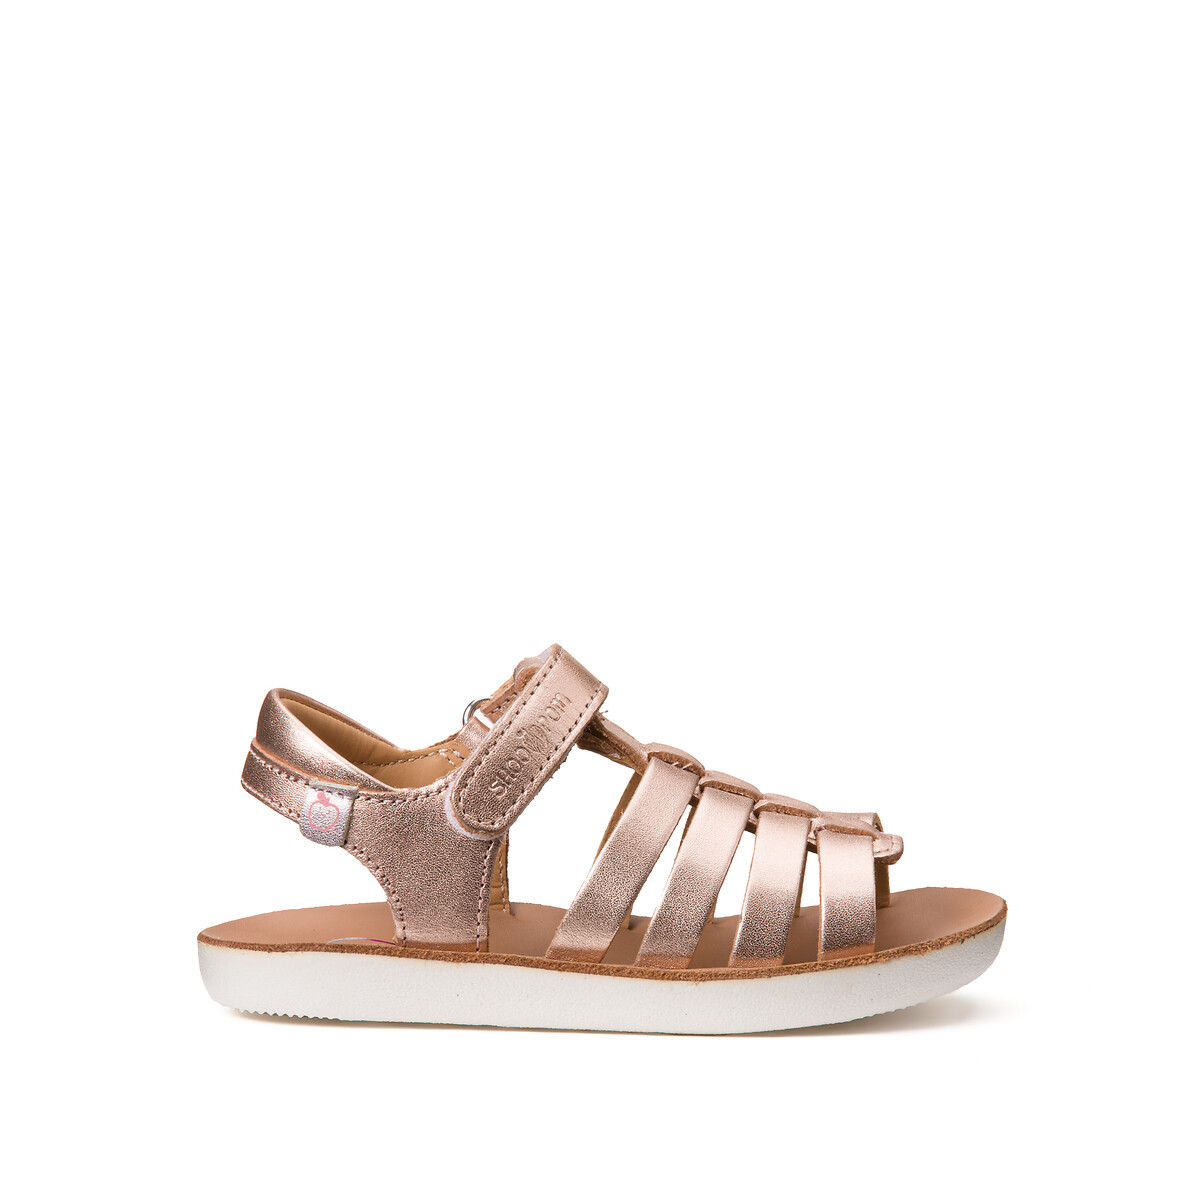 Kids Goa Spart Sandals in Leather with Touch ’n’ Close Fastening